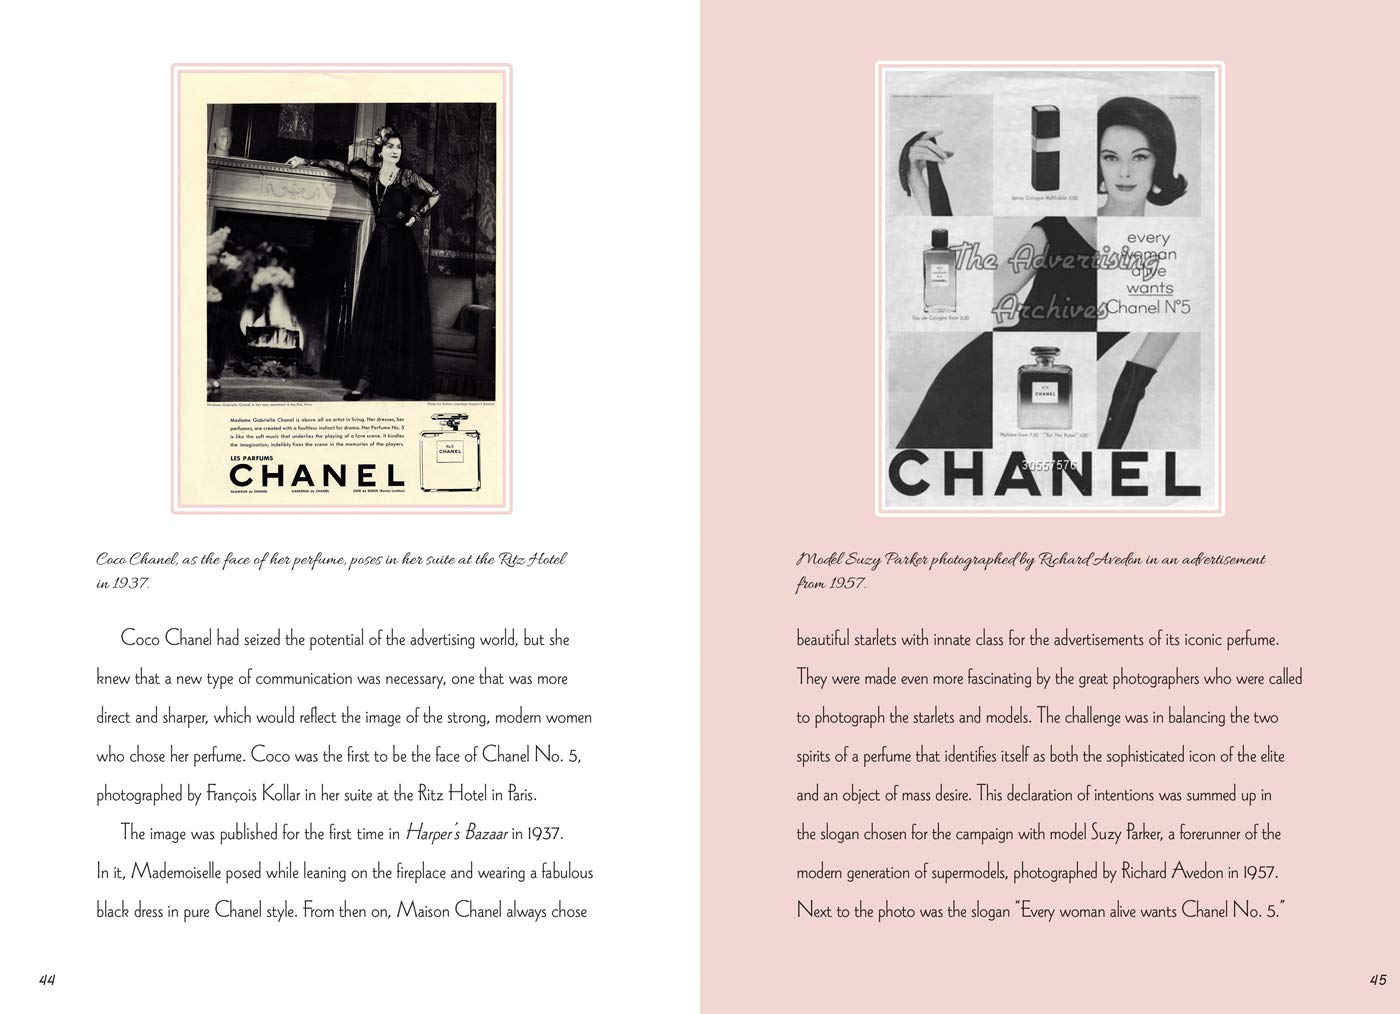 CHANEL NO. 5 - The Perfume of a Century